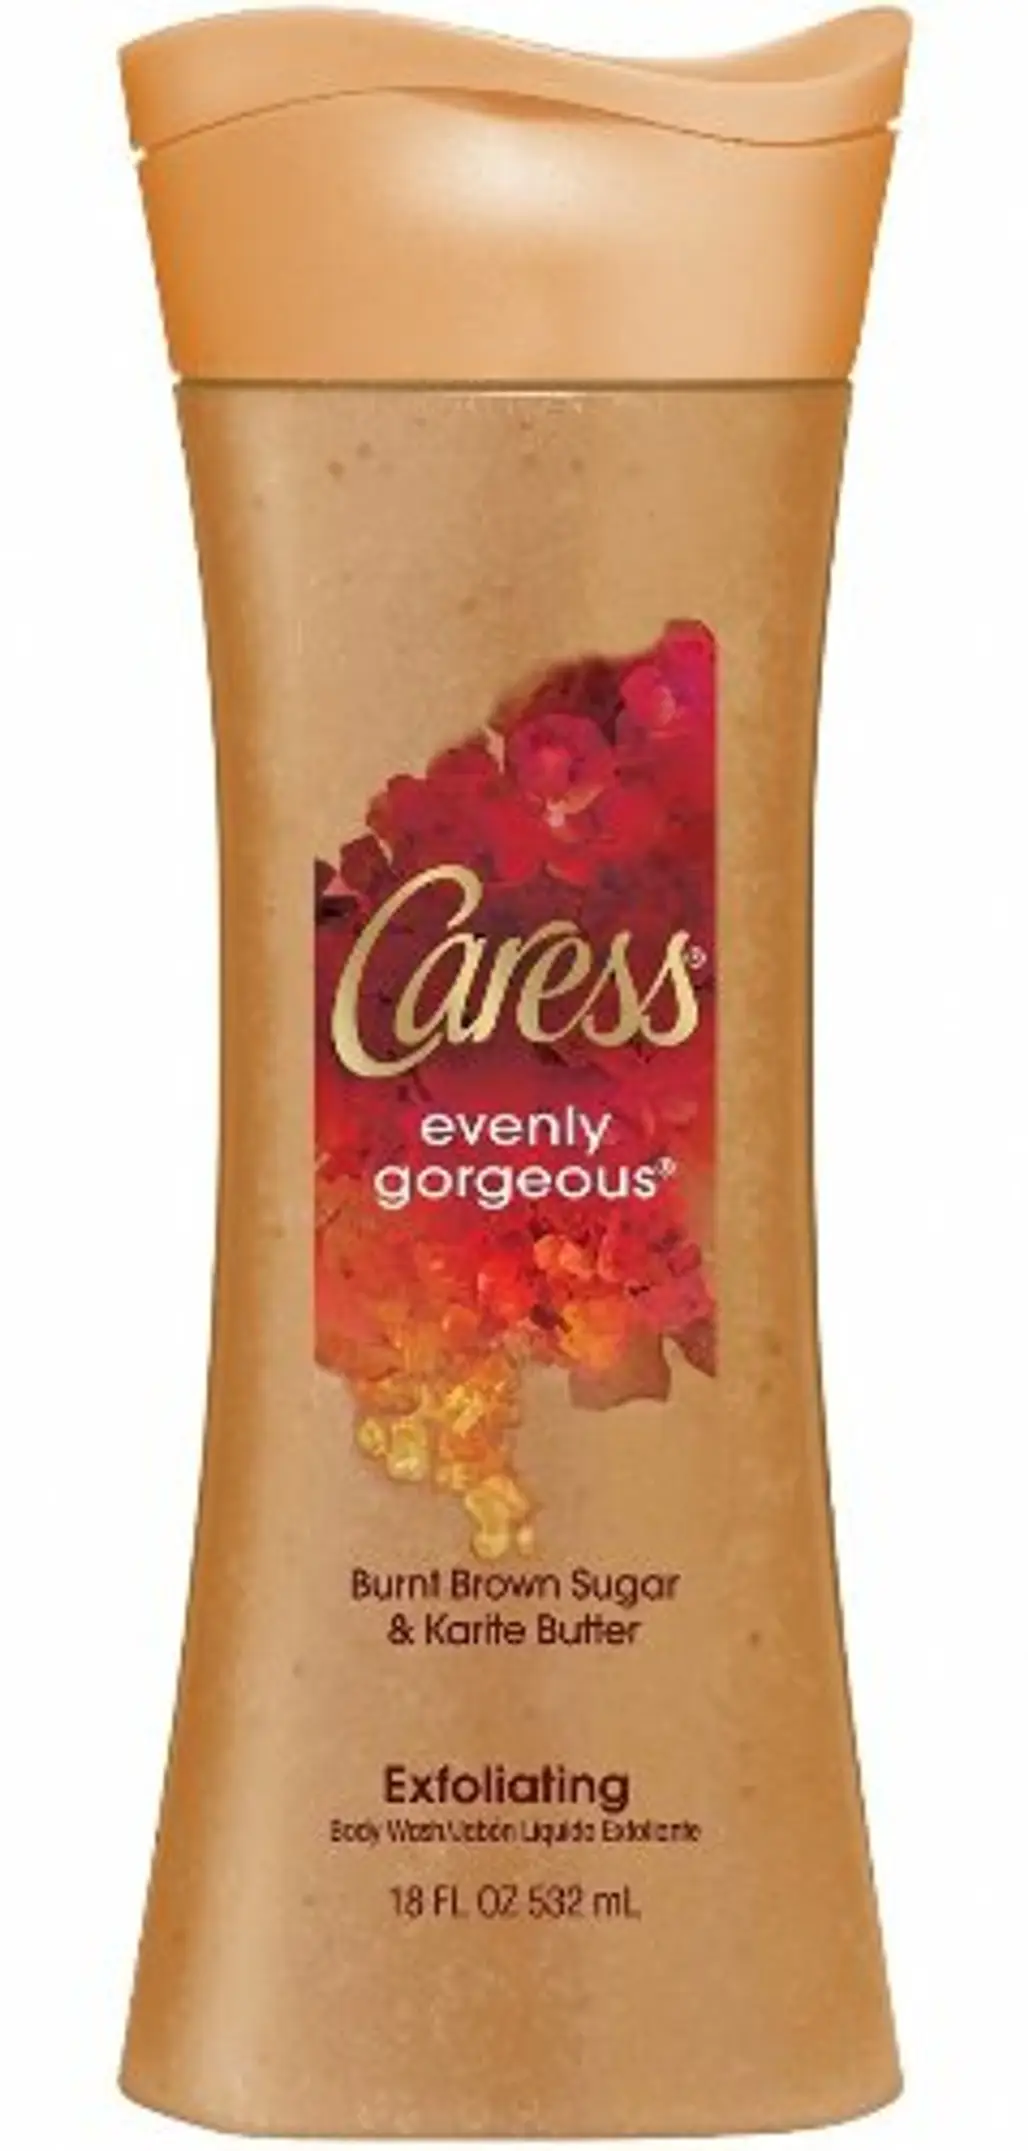 Caress Evenly Gorgeous Burnt Brown Sugar and Karite Butter Body Wash